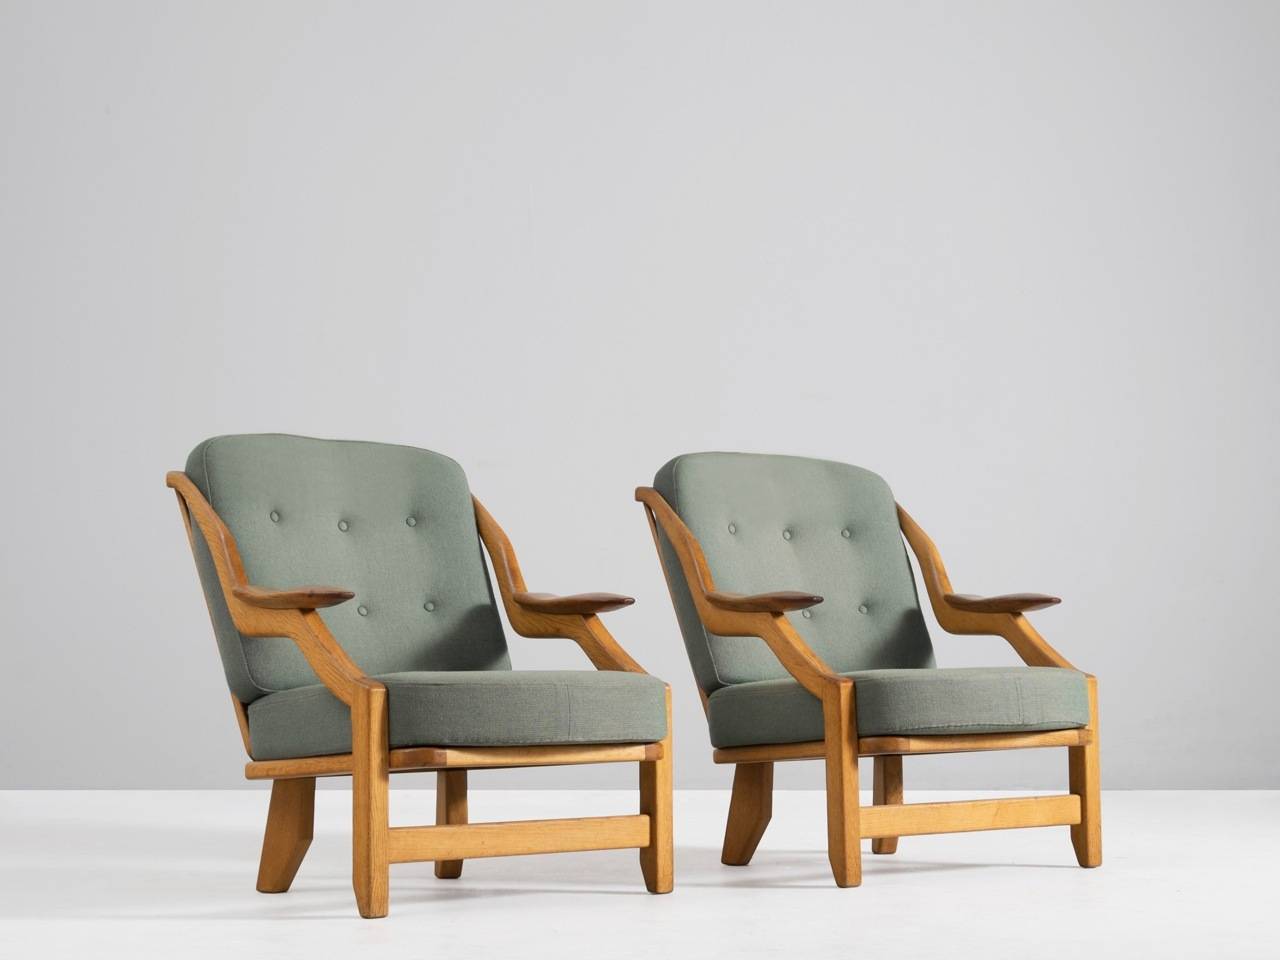 An extraordinary pair of armchairs designed by Guillerme et Chambron, France, 1950's.

Guillerme and Chambron is known for their extreme high quality solid oak furniture, from which this is another example. This pair has a very interesting shape